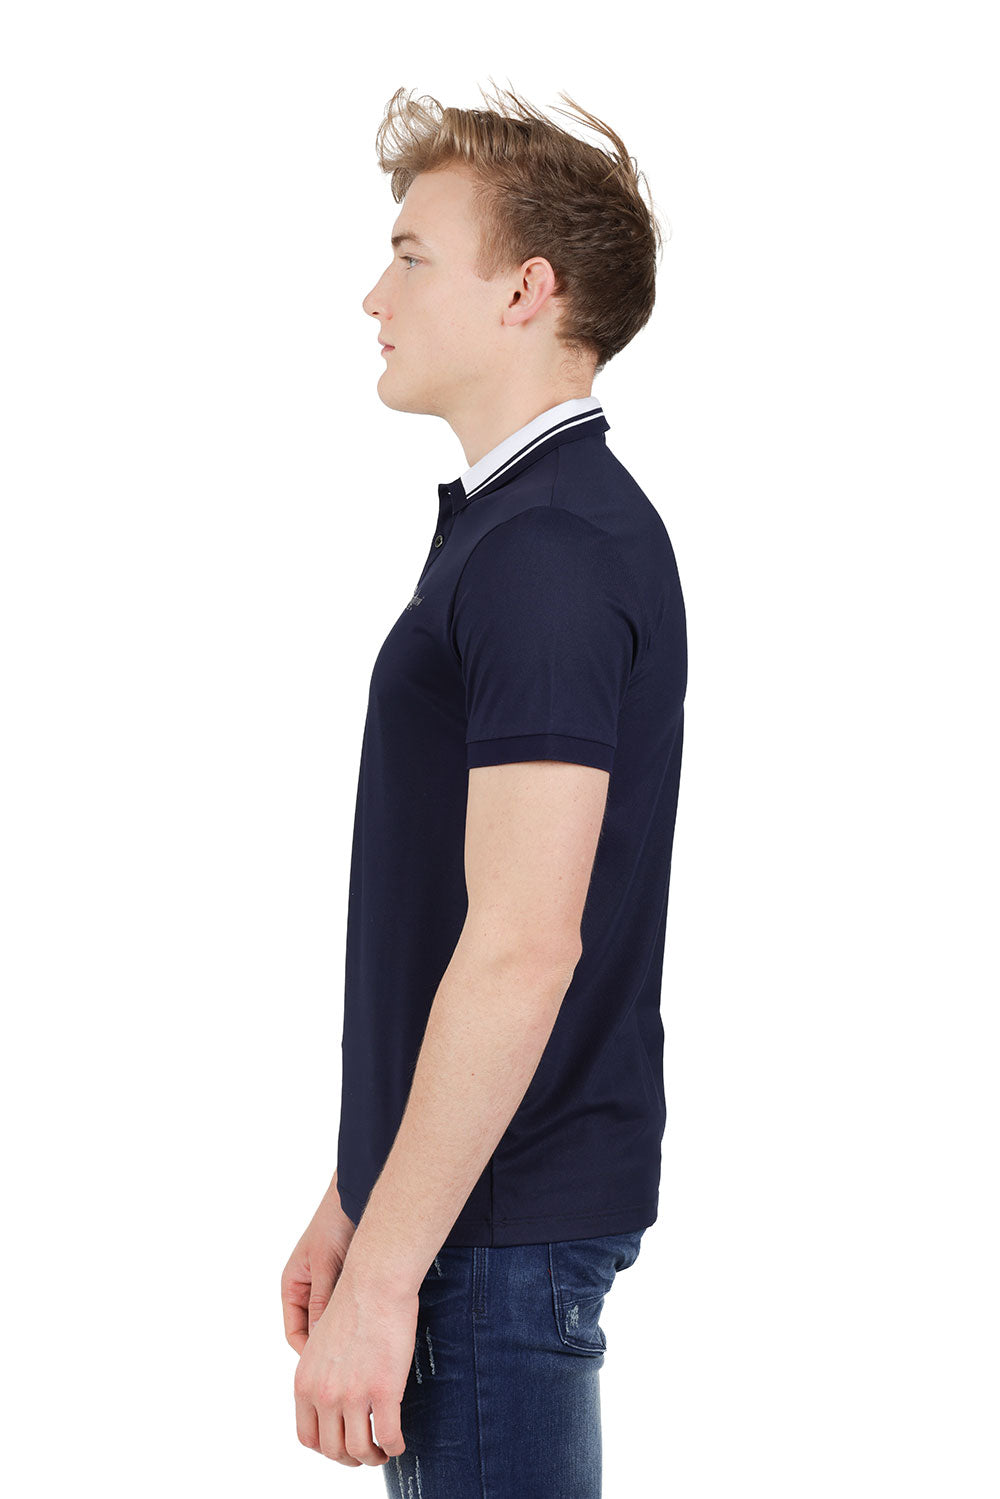 Barabas Men's Solid Color Luxury Short Sleeves Polo Shirts PP824 Navy